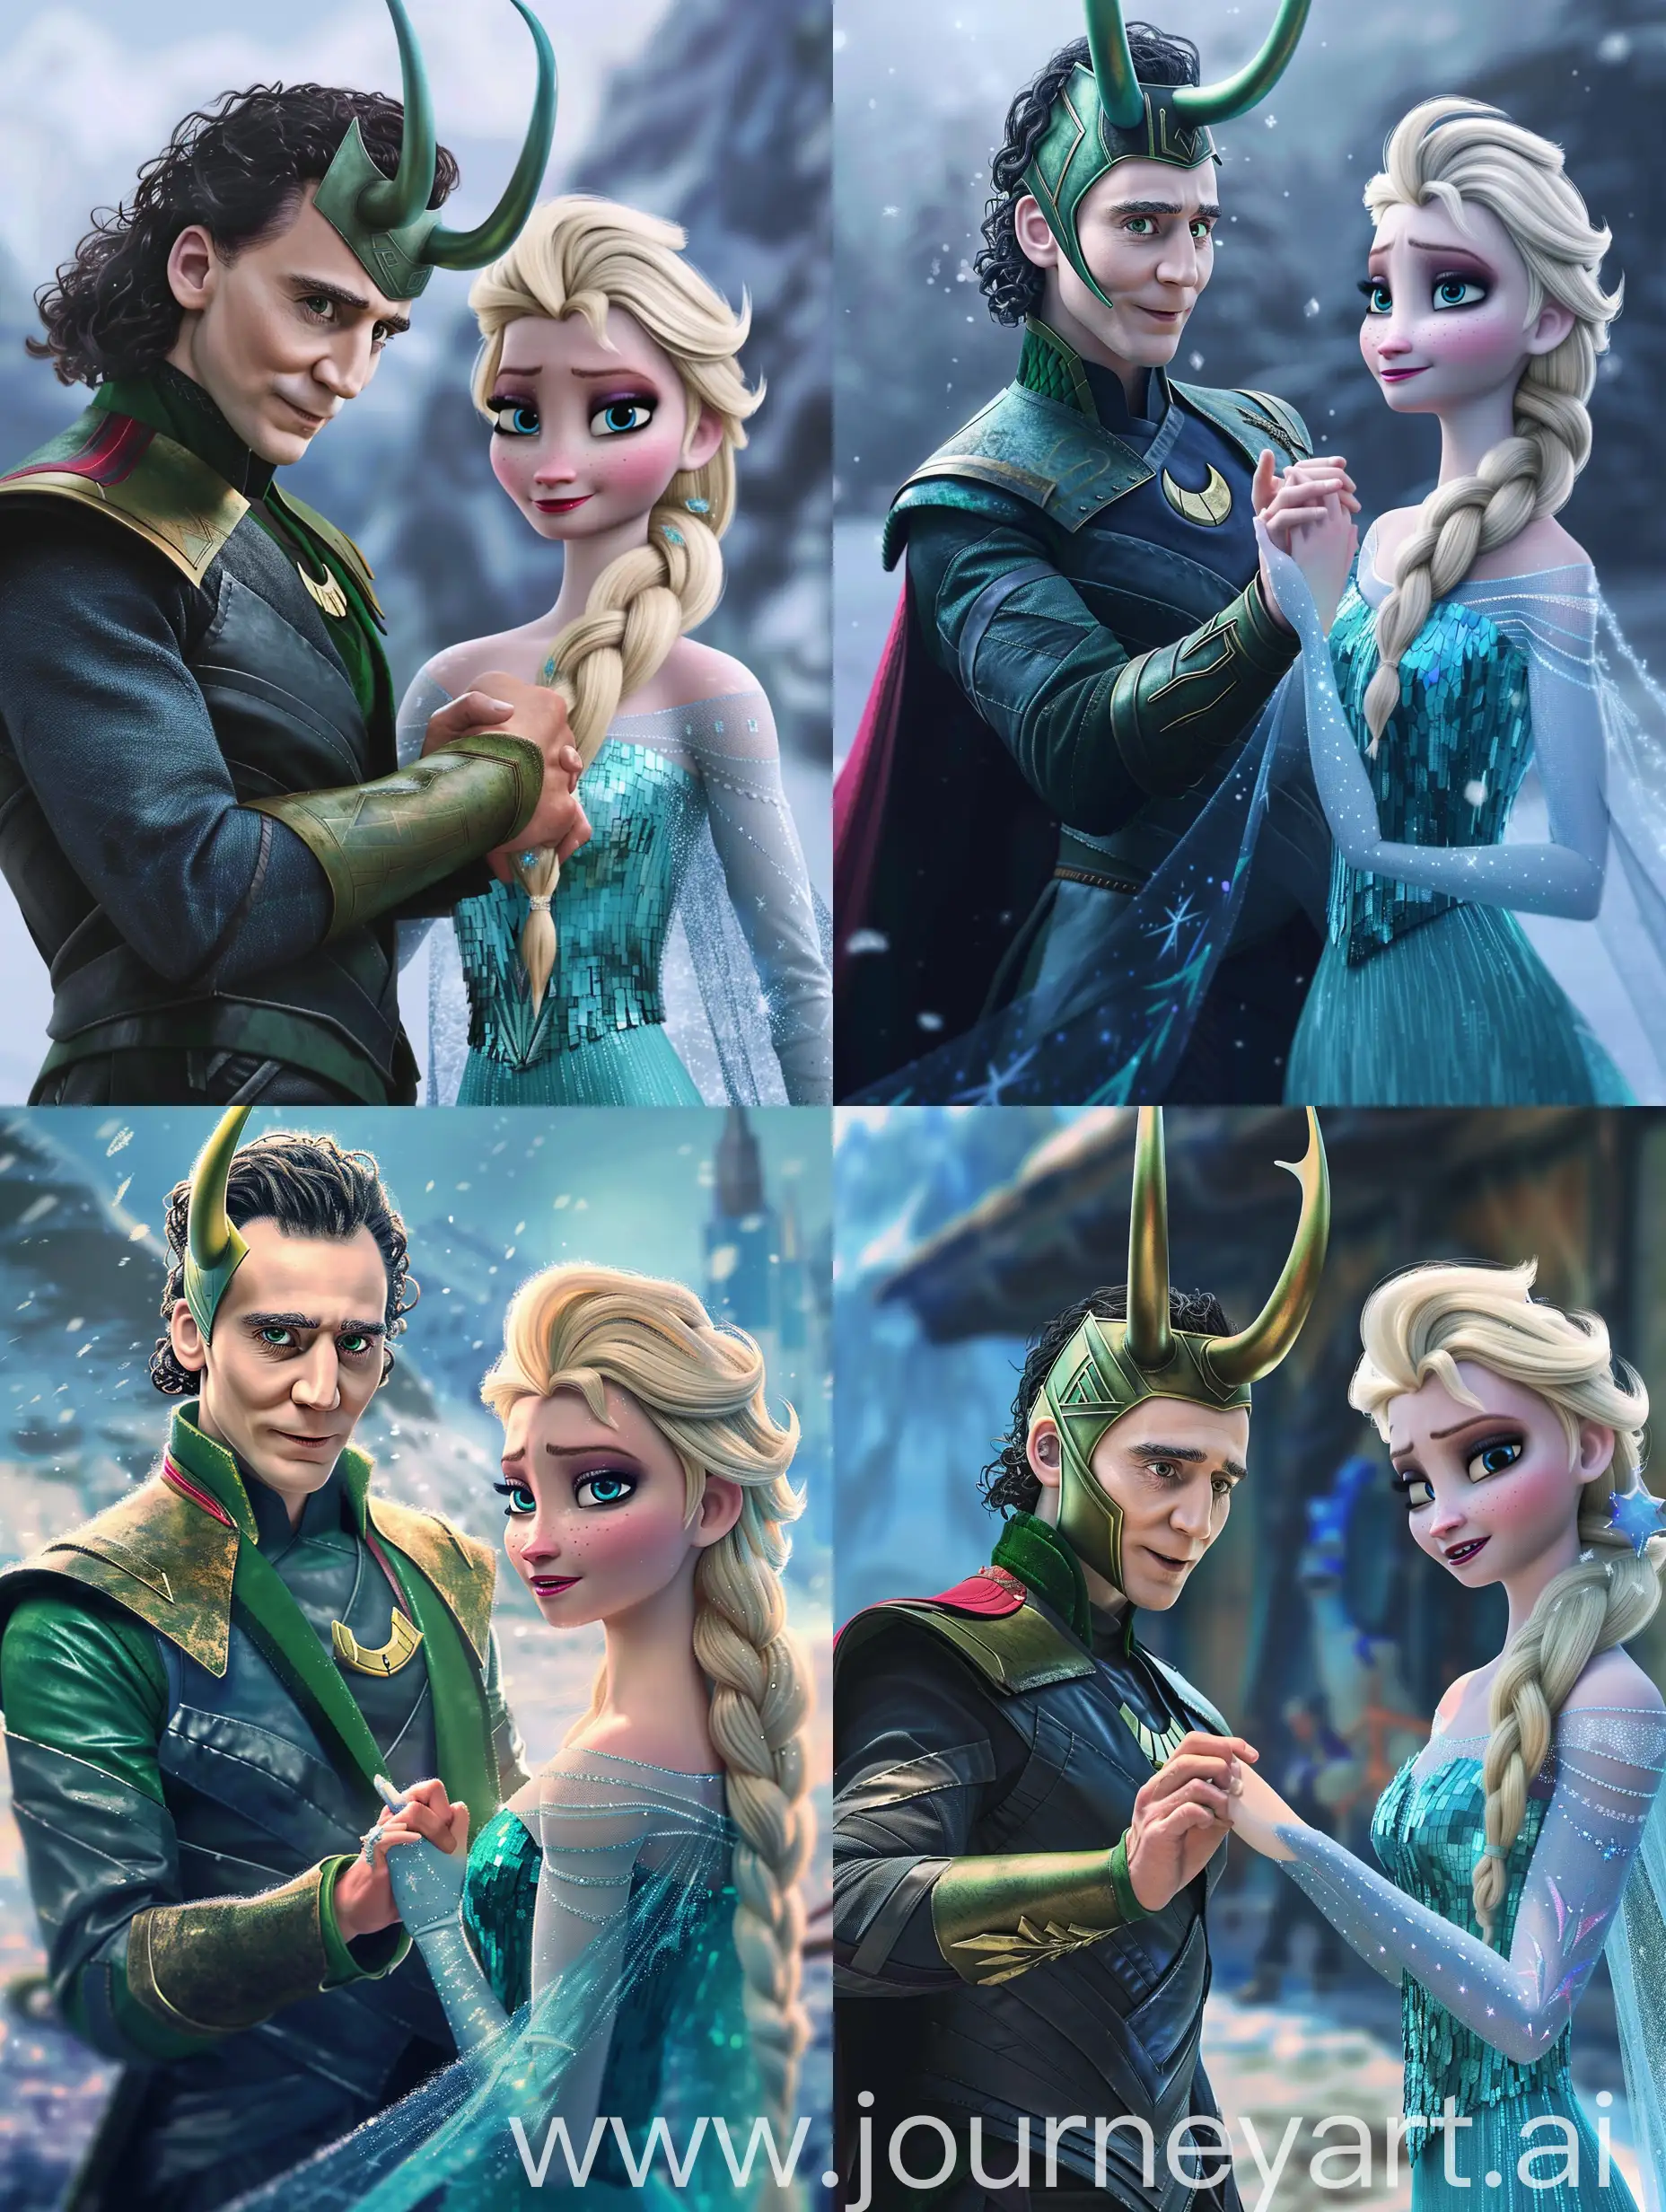 Tom-Hiddleston-as-Loki-Holding-Hands-with-Elsa-from-Frozen